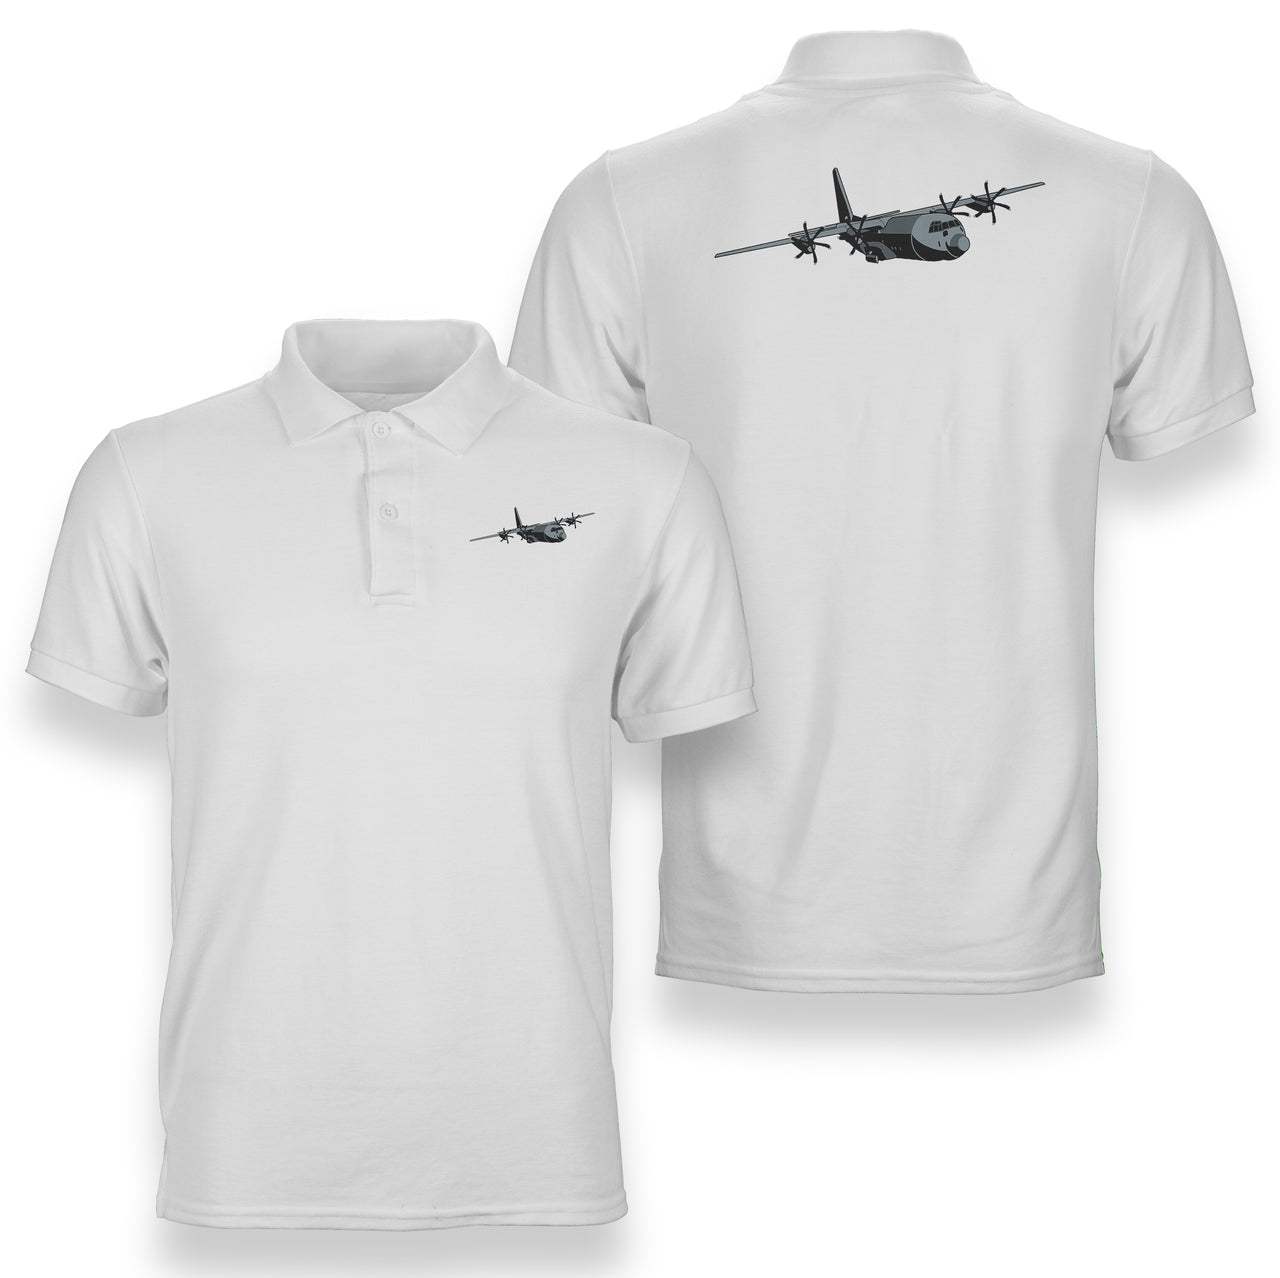 The Hercules C130 Designed Double Side Polo T-Shirts